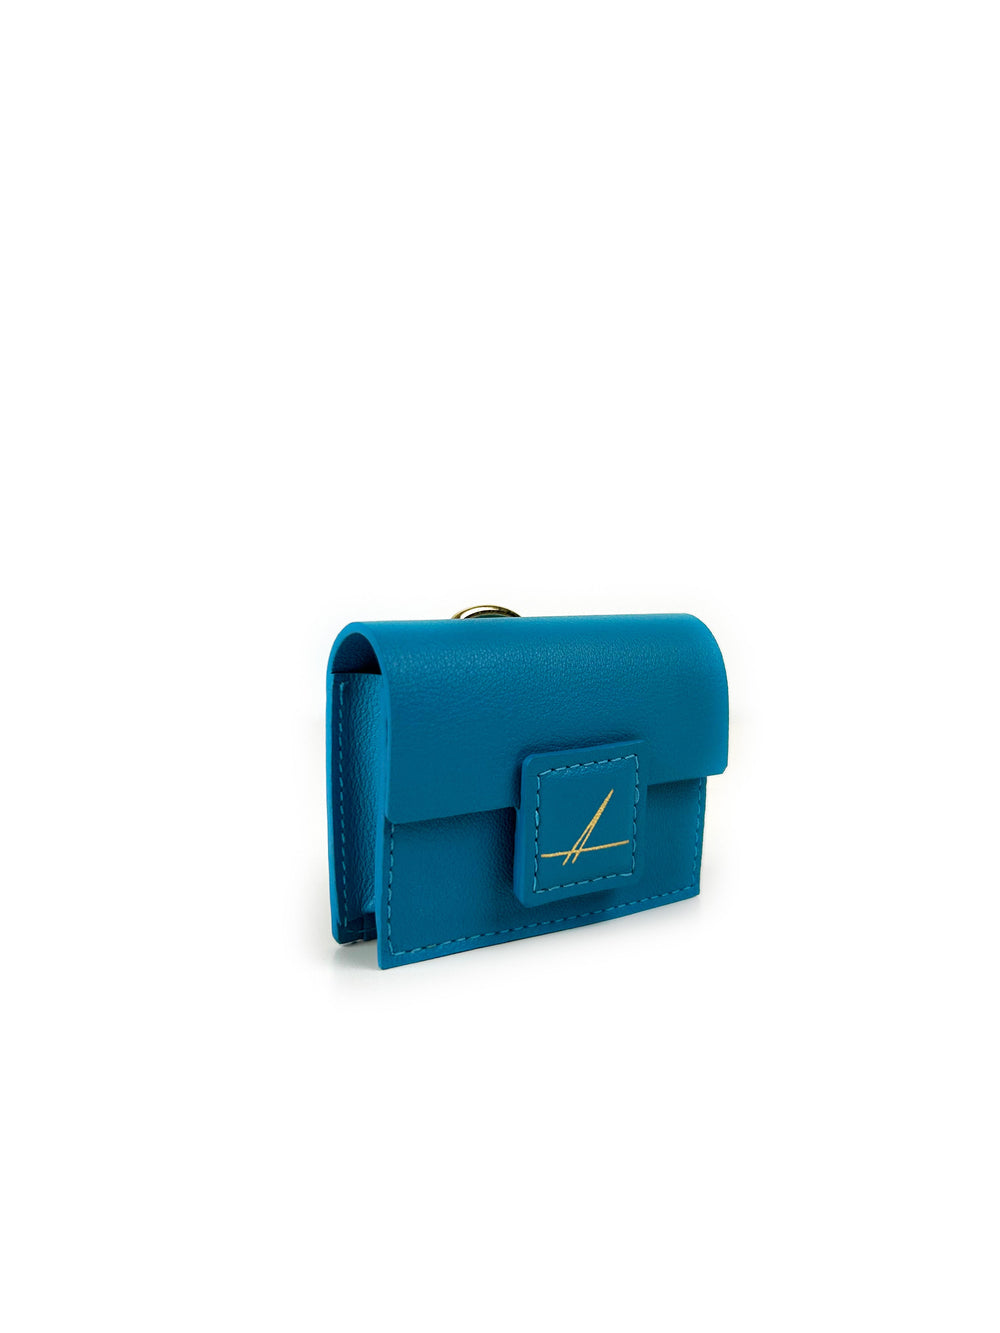 Blue leather wallet with minimalist design and gold accent on flap